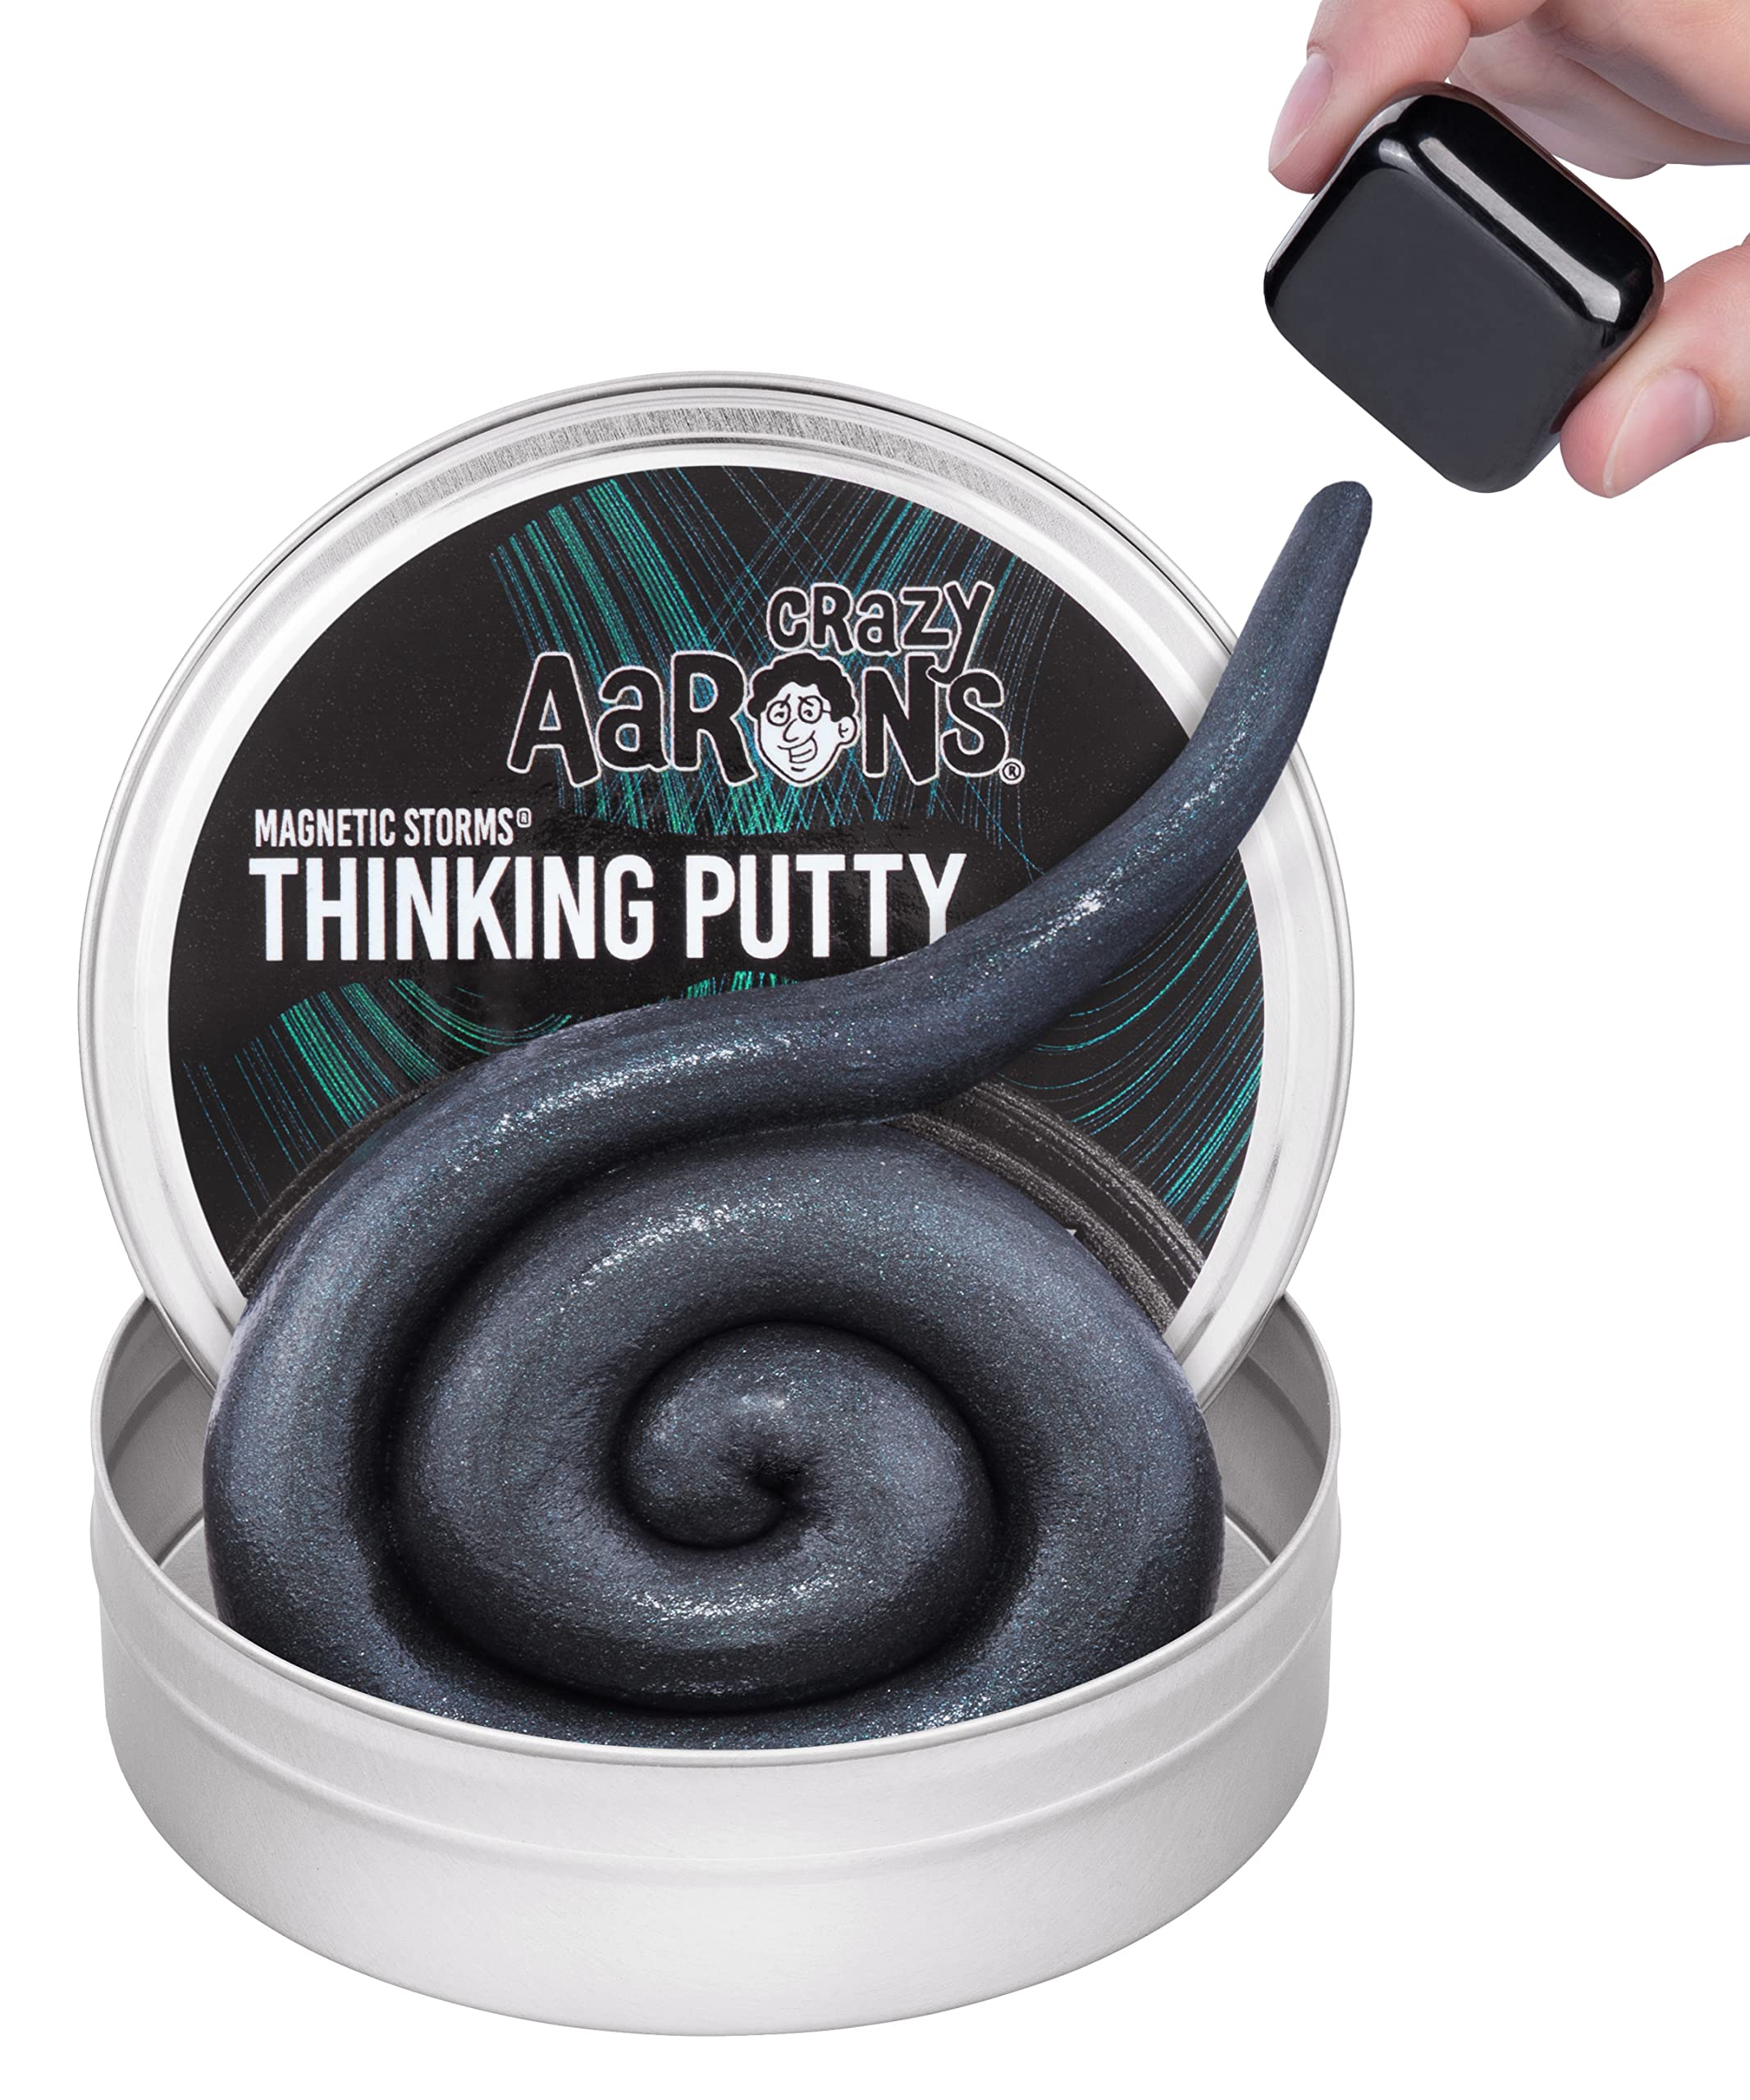 Crazy Aaron’s Magnetic Storms® Strange Attractor Thinking Putty®